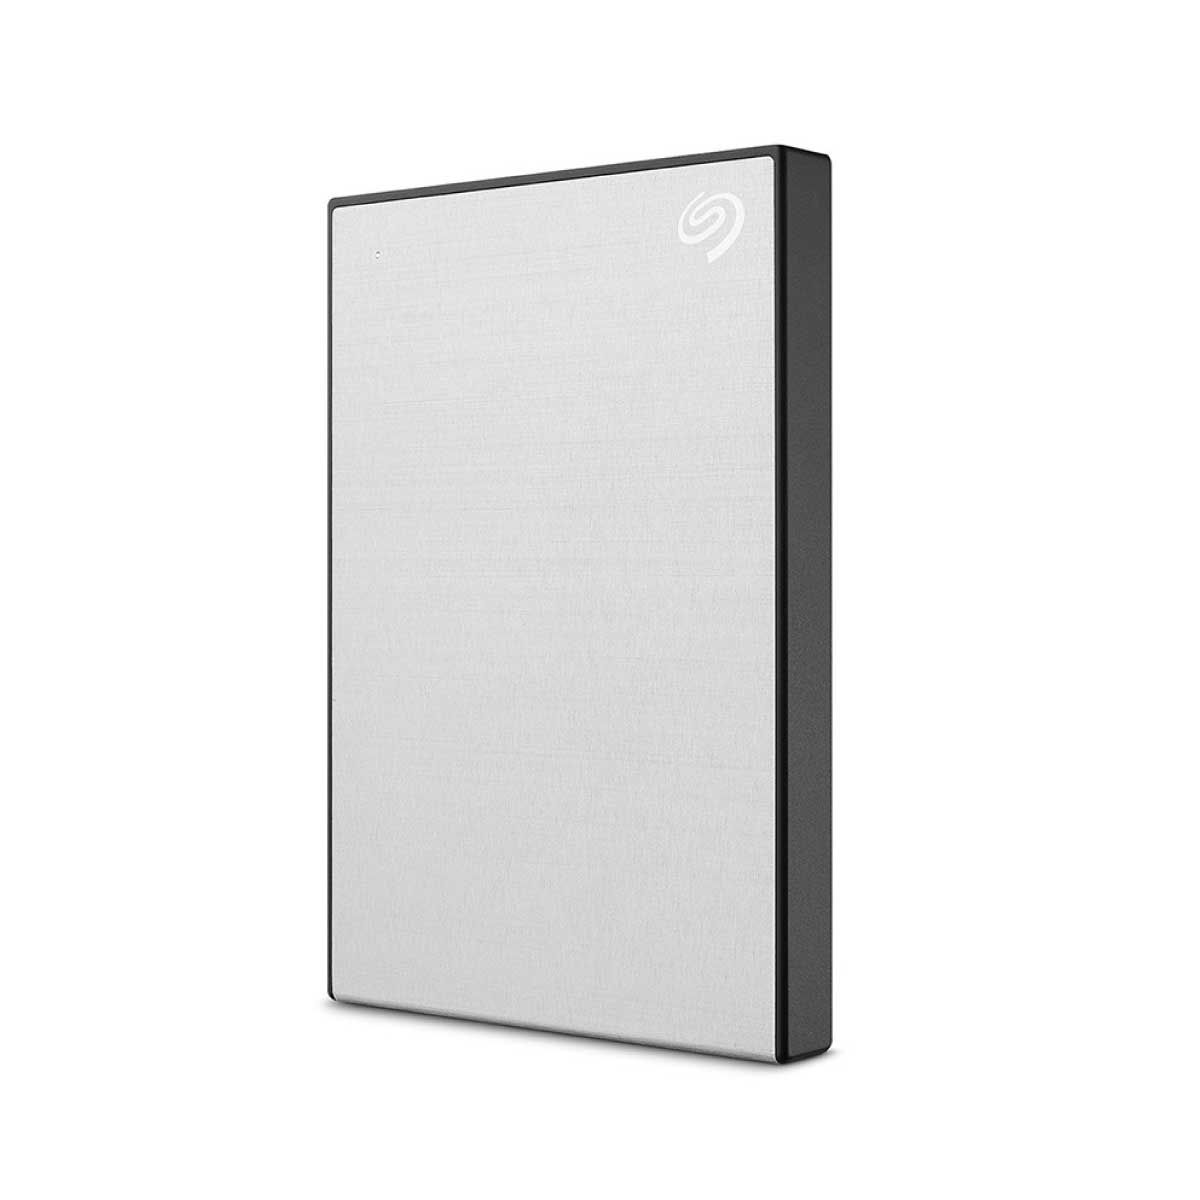 1 TB PORTABLE HDD (ฮาร์ดดิสก์พกพา) SEAGATE ONE TOUCH WITH PASSWORD (SILVER) (STKY1000401)